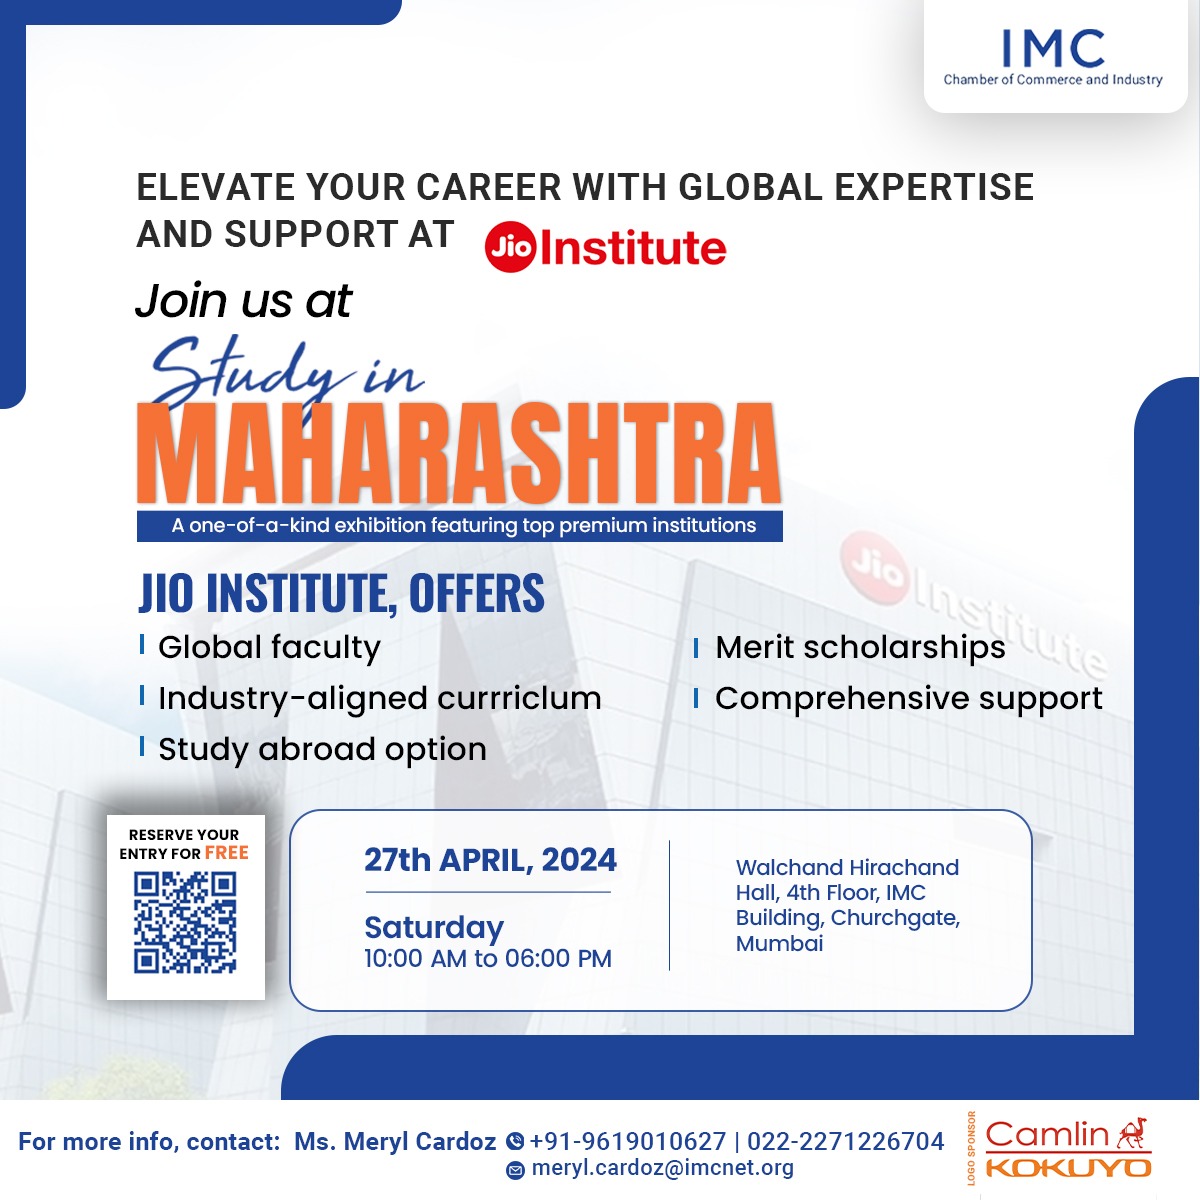 Join us at the #StudyInMaharashtra Exhibition and connect with Jio Institute to enhance your career with global expertise! 🗓️ 27th April, 2024 🕰️ 10:00 AM - 06:00 PM 📍 Walchand Hirachand Hall, 4th Floor, IMC Building, Churchgate, Mumbai Register At: imcnet.org/events-2267